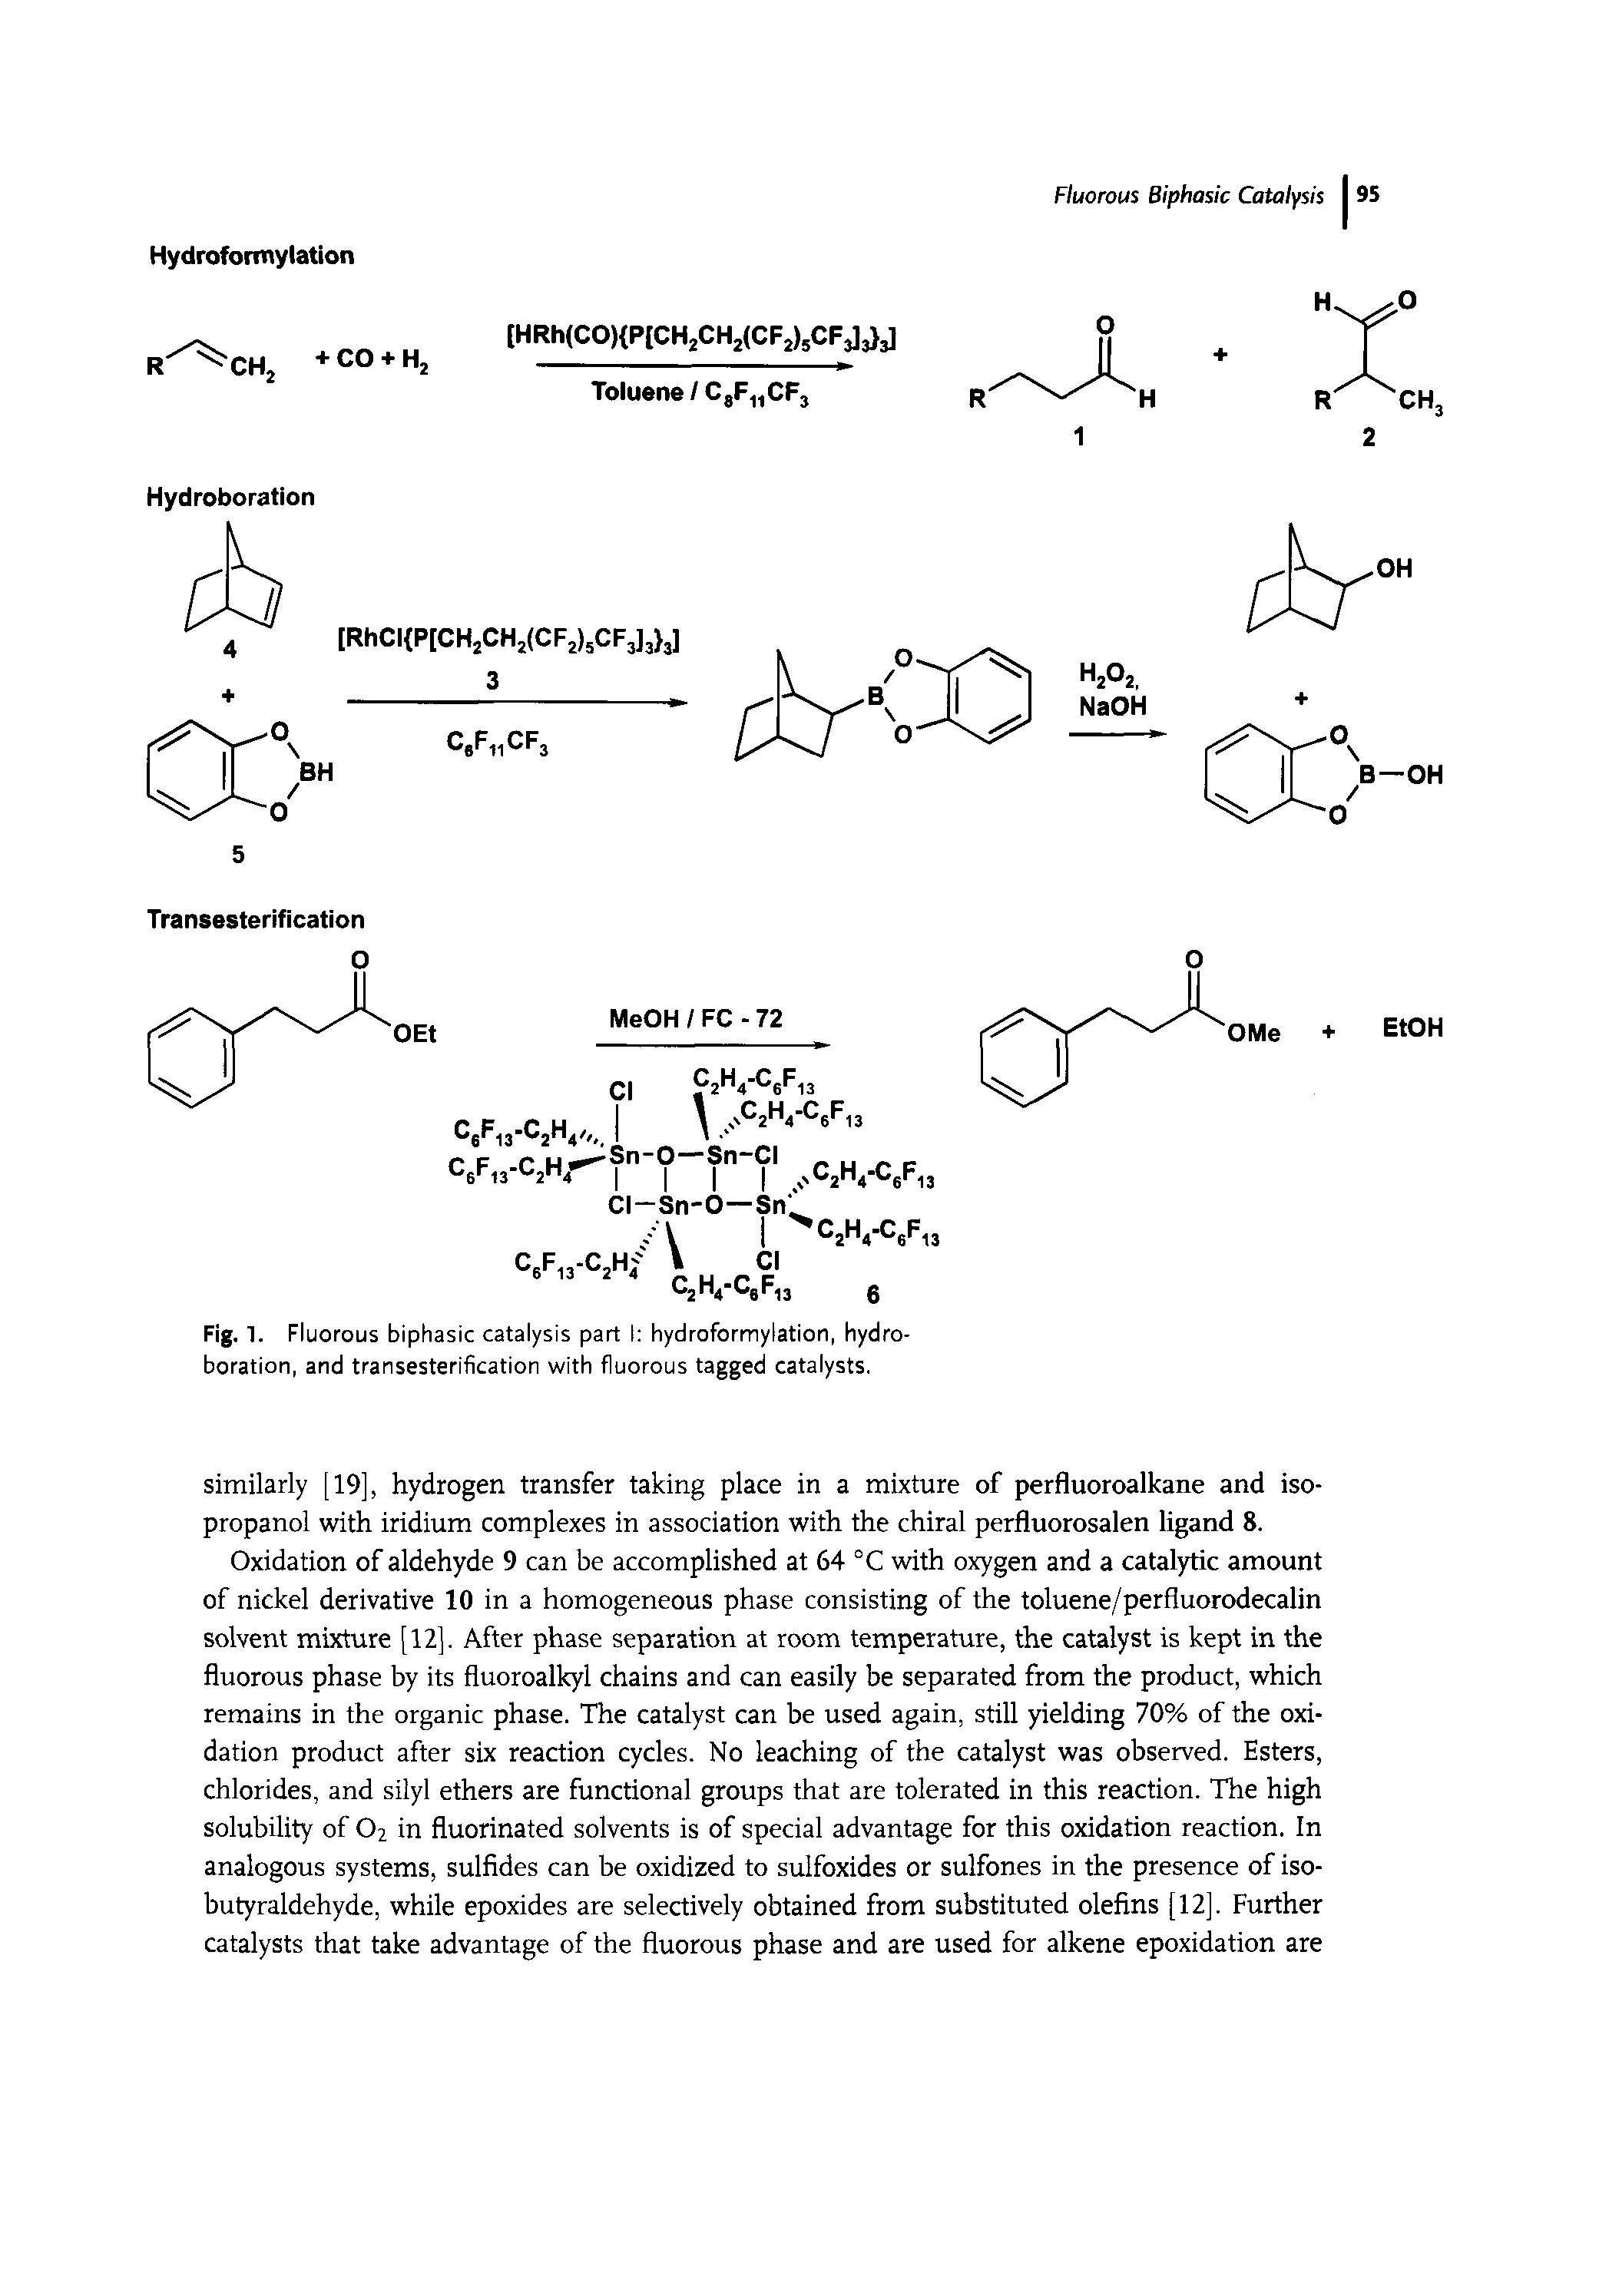 Fig. 1. Fluorous biphasic catalysis part I hydroformylation, hydro-boration, and transesterification with fluorous tagged catalysts.